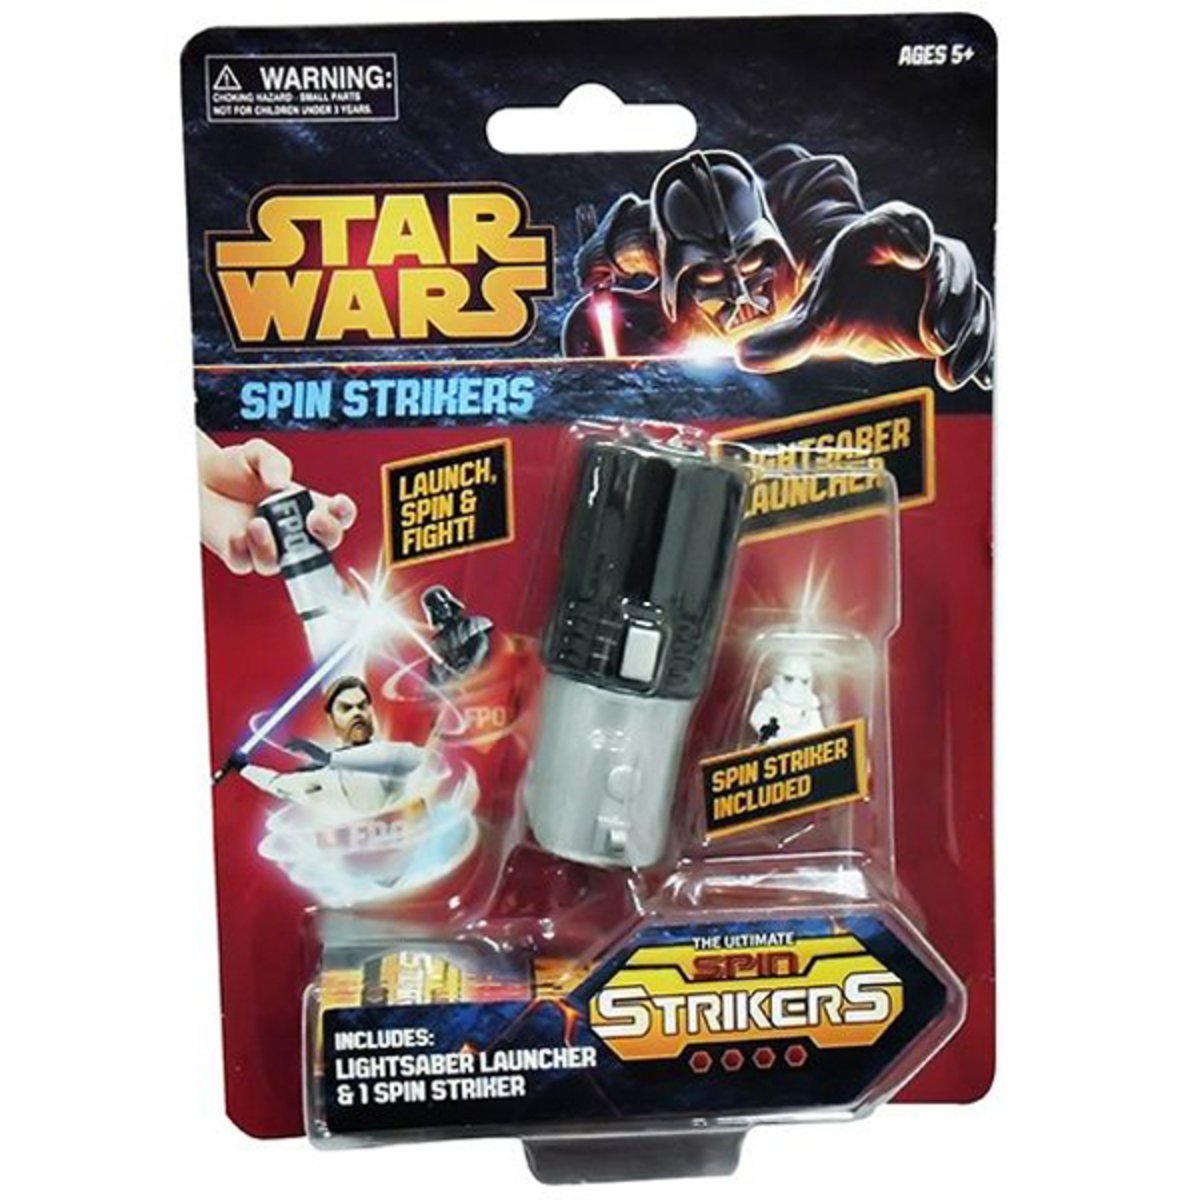 Star Wars Spin Strikers Launcher Pack